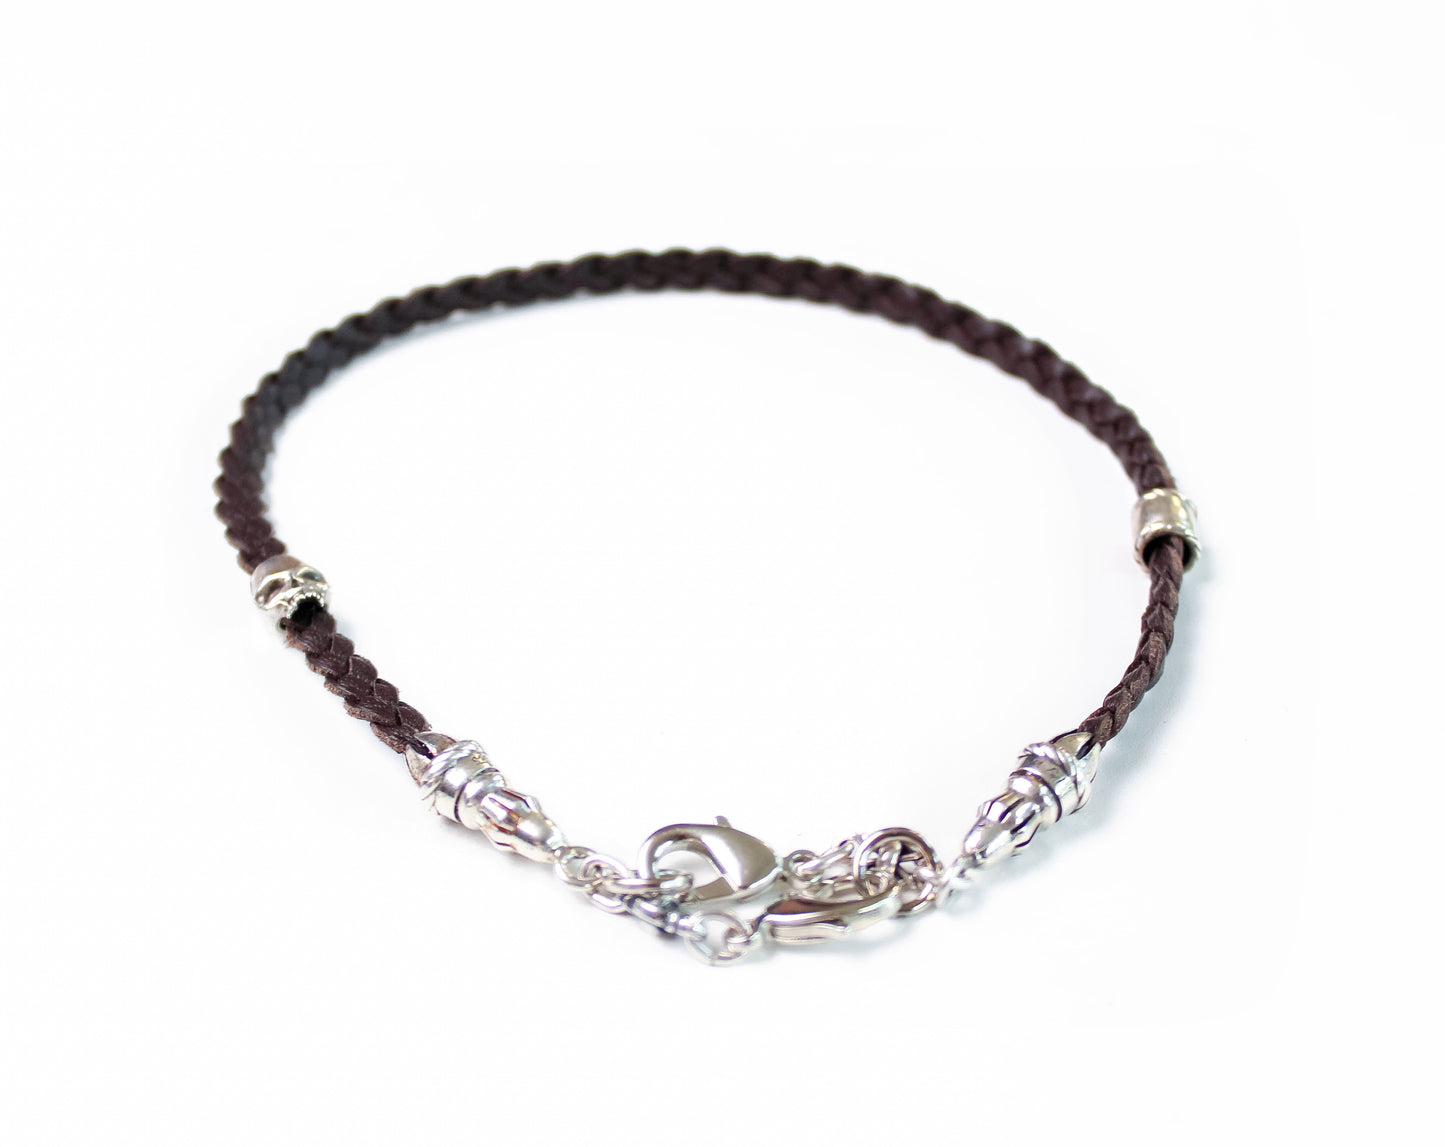 925 Sterling Silver & Genuine Leather Bracelet/Choker/Strap with three double strands braided by hand, Brown or Black.- P03